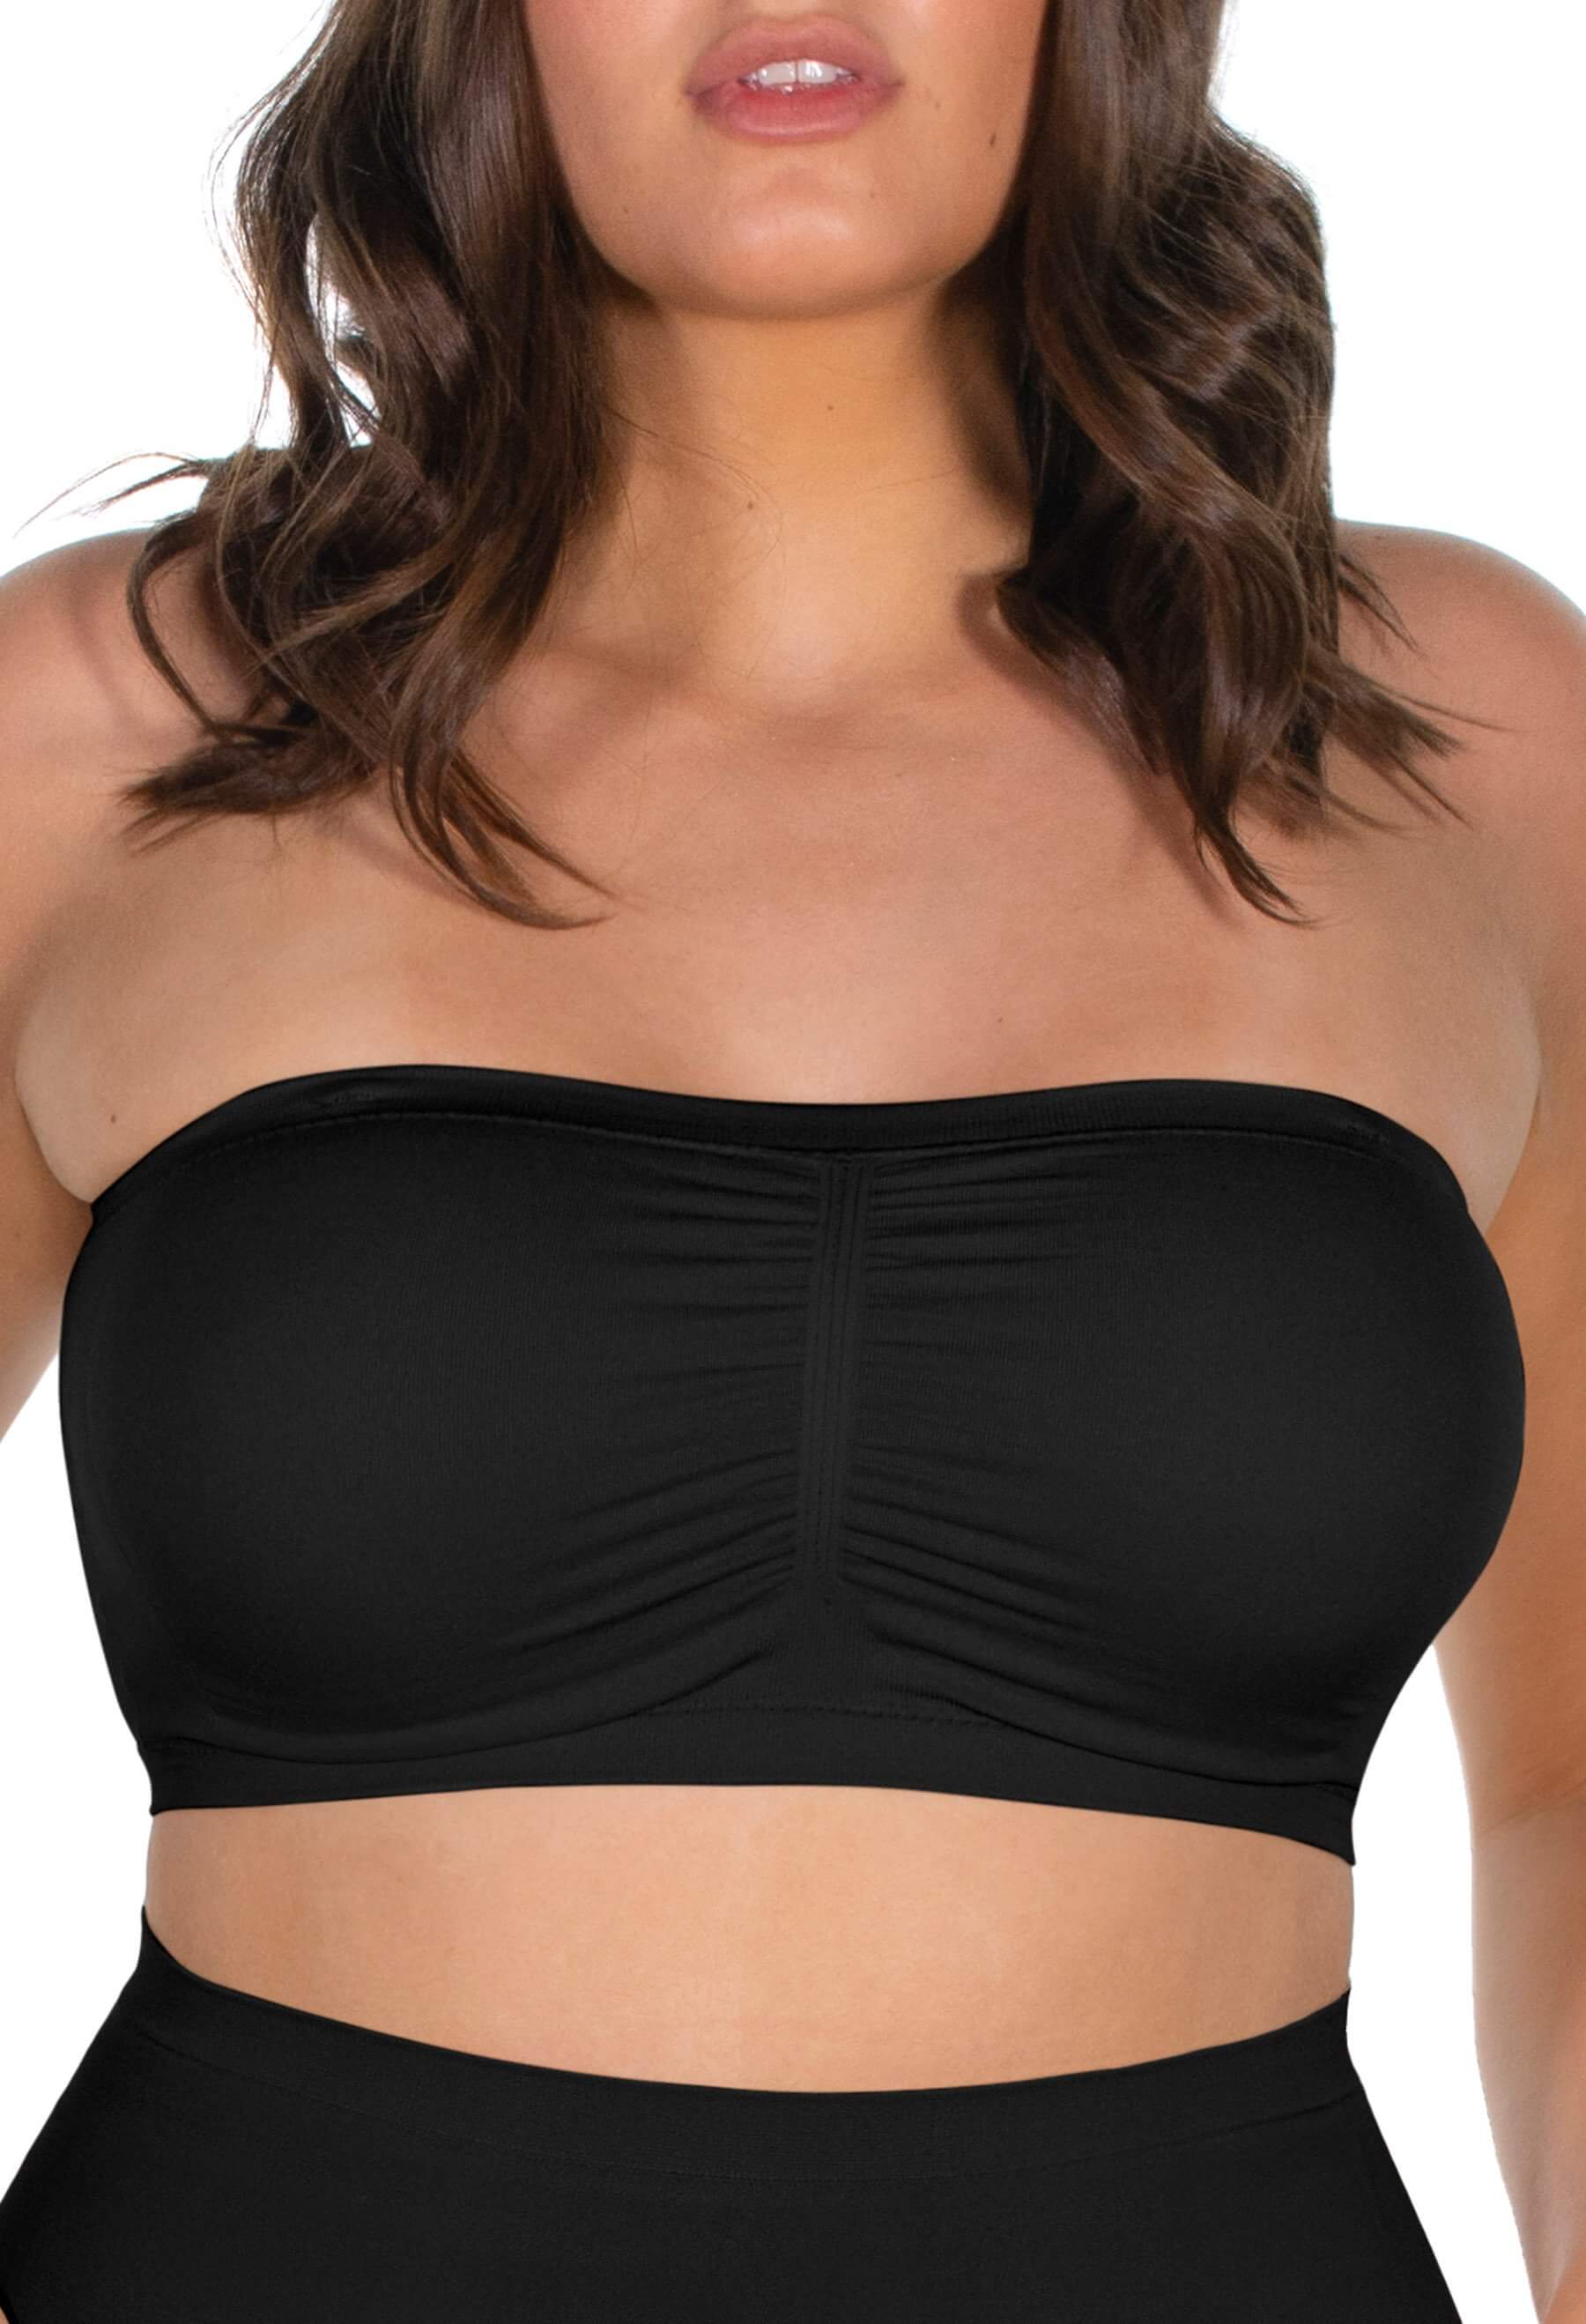 Tube Bra Non Padded Strapless Bra Soft and Comfortable, New Fashion Style  For Girls and Women EXCELLENT QUALITY Stretchable Bra